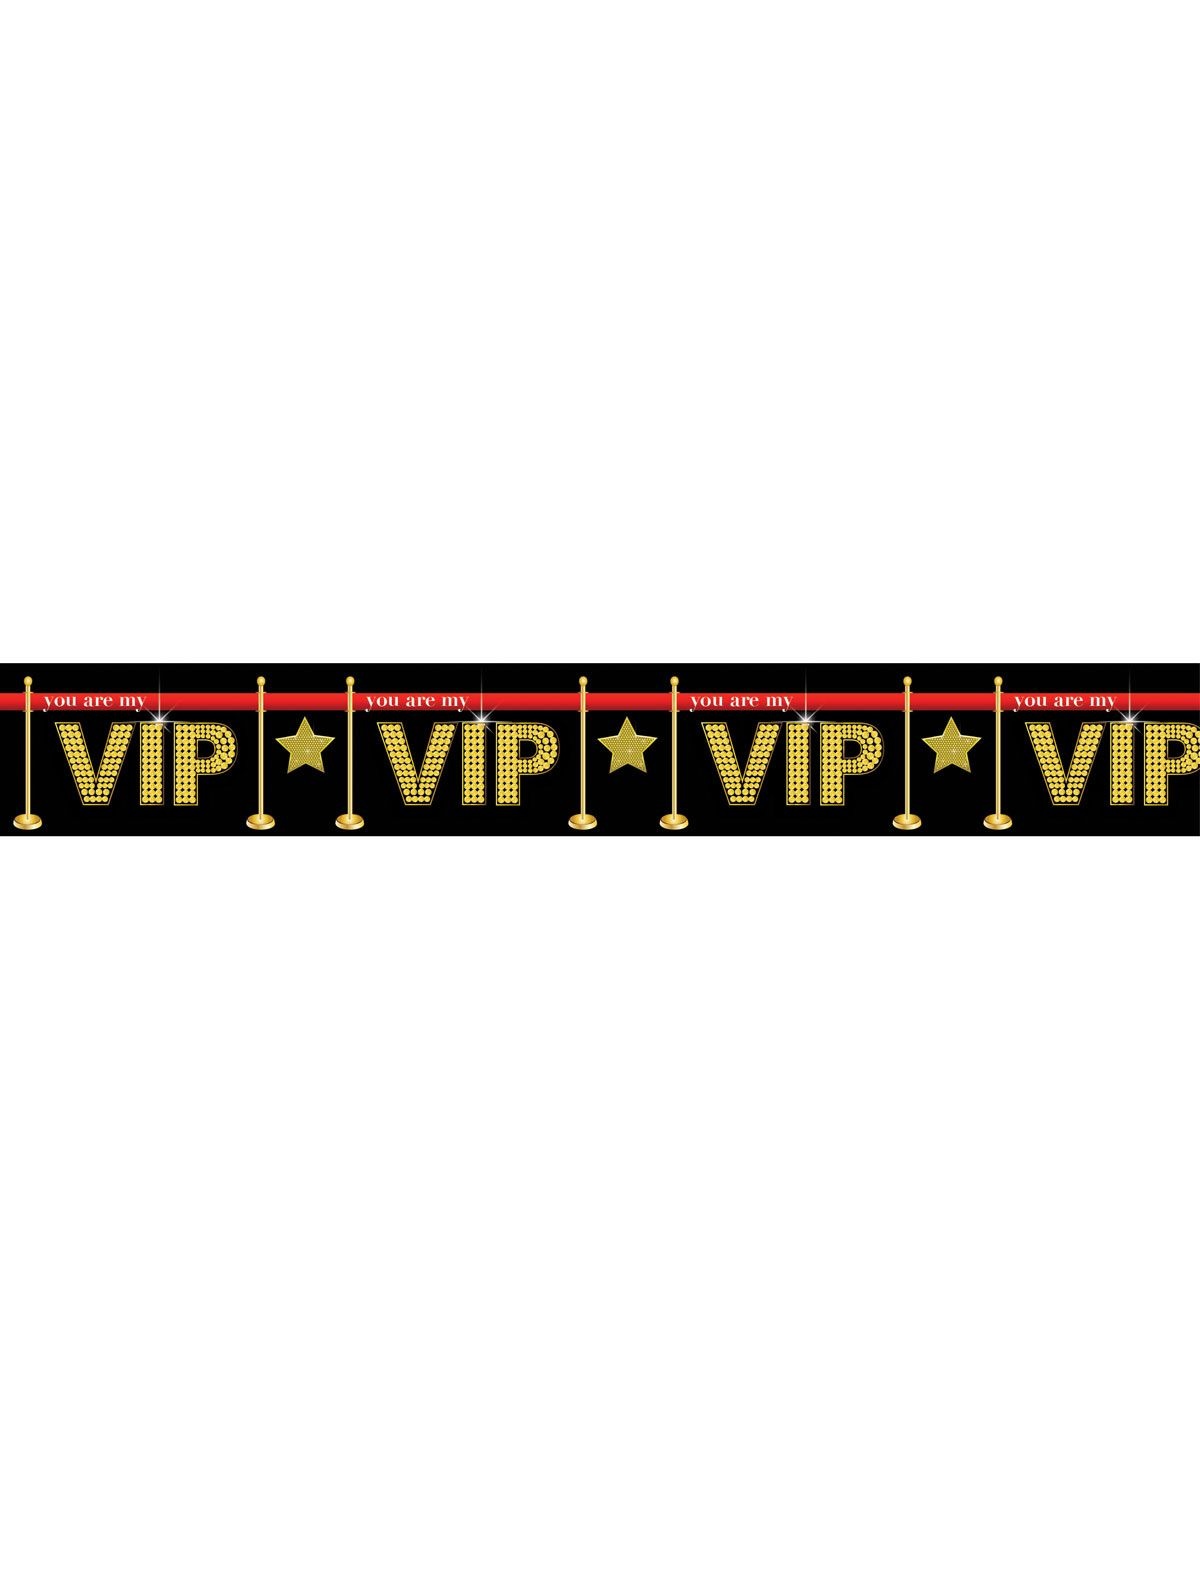 Afzetlint 'you are my VIP'